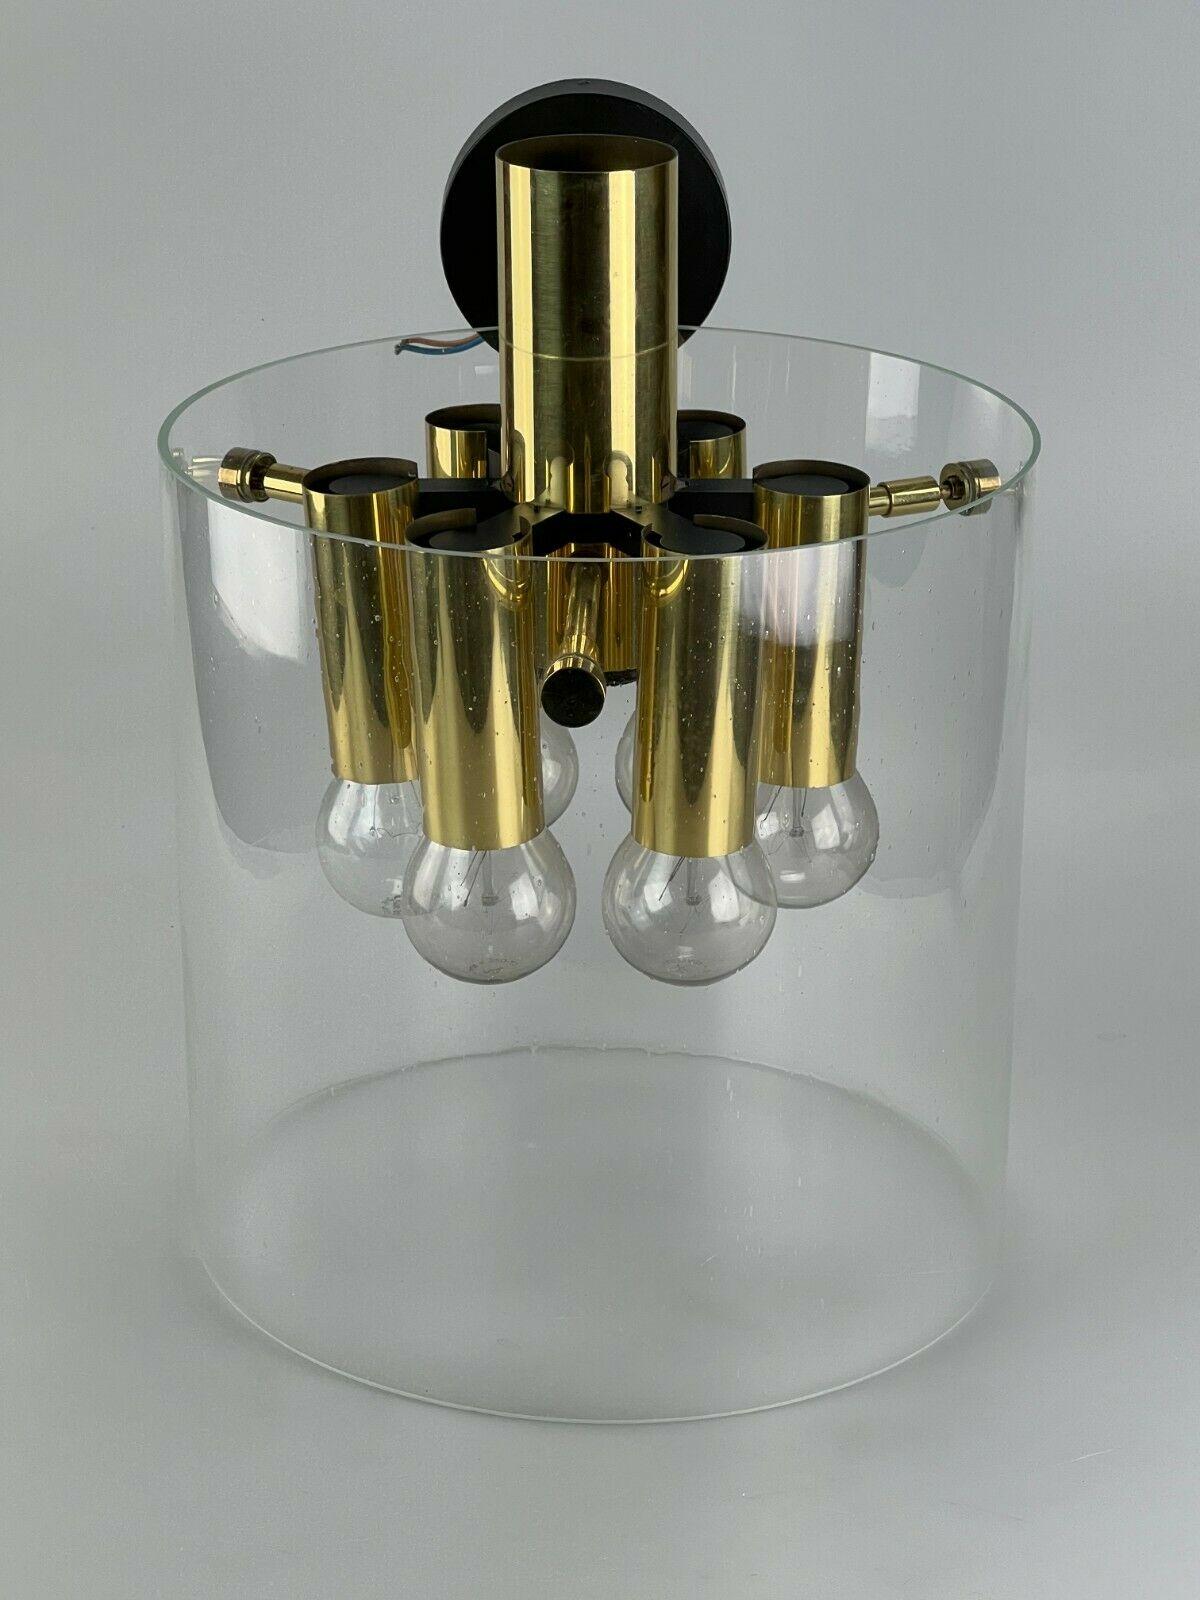 XL 60s 70s Lamp Light Wall Lamp Wall Sconve Limburg Space Age Design In Good Condition For Sale In Neuenkirchen, NI